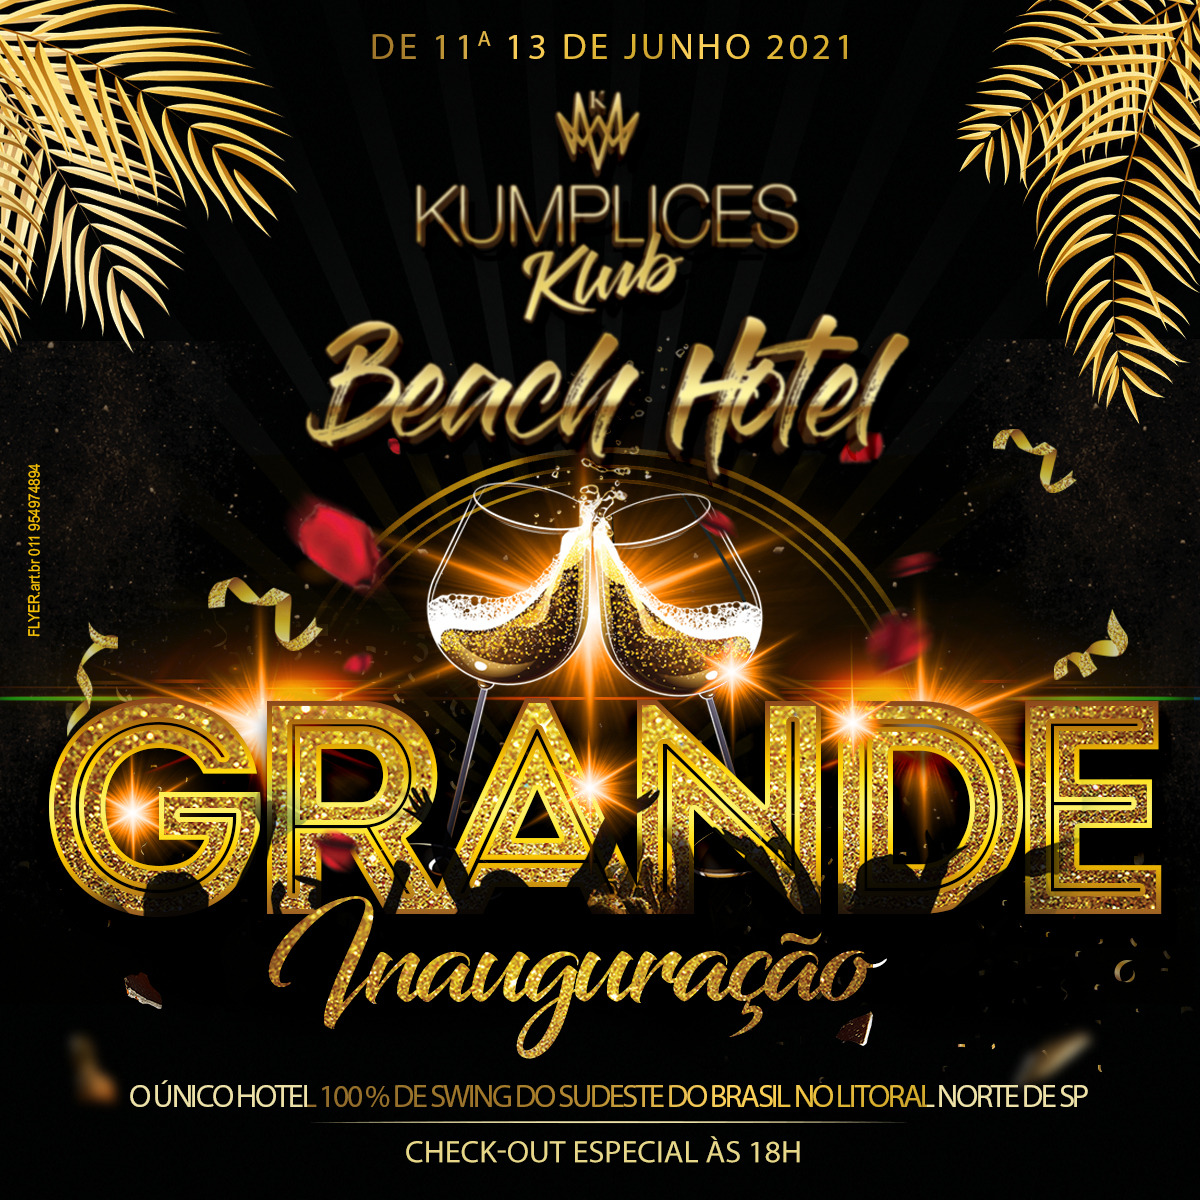 You are currently viewing KUMPLICES KLUB BEACH HOTEL!!!!!!!